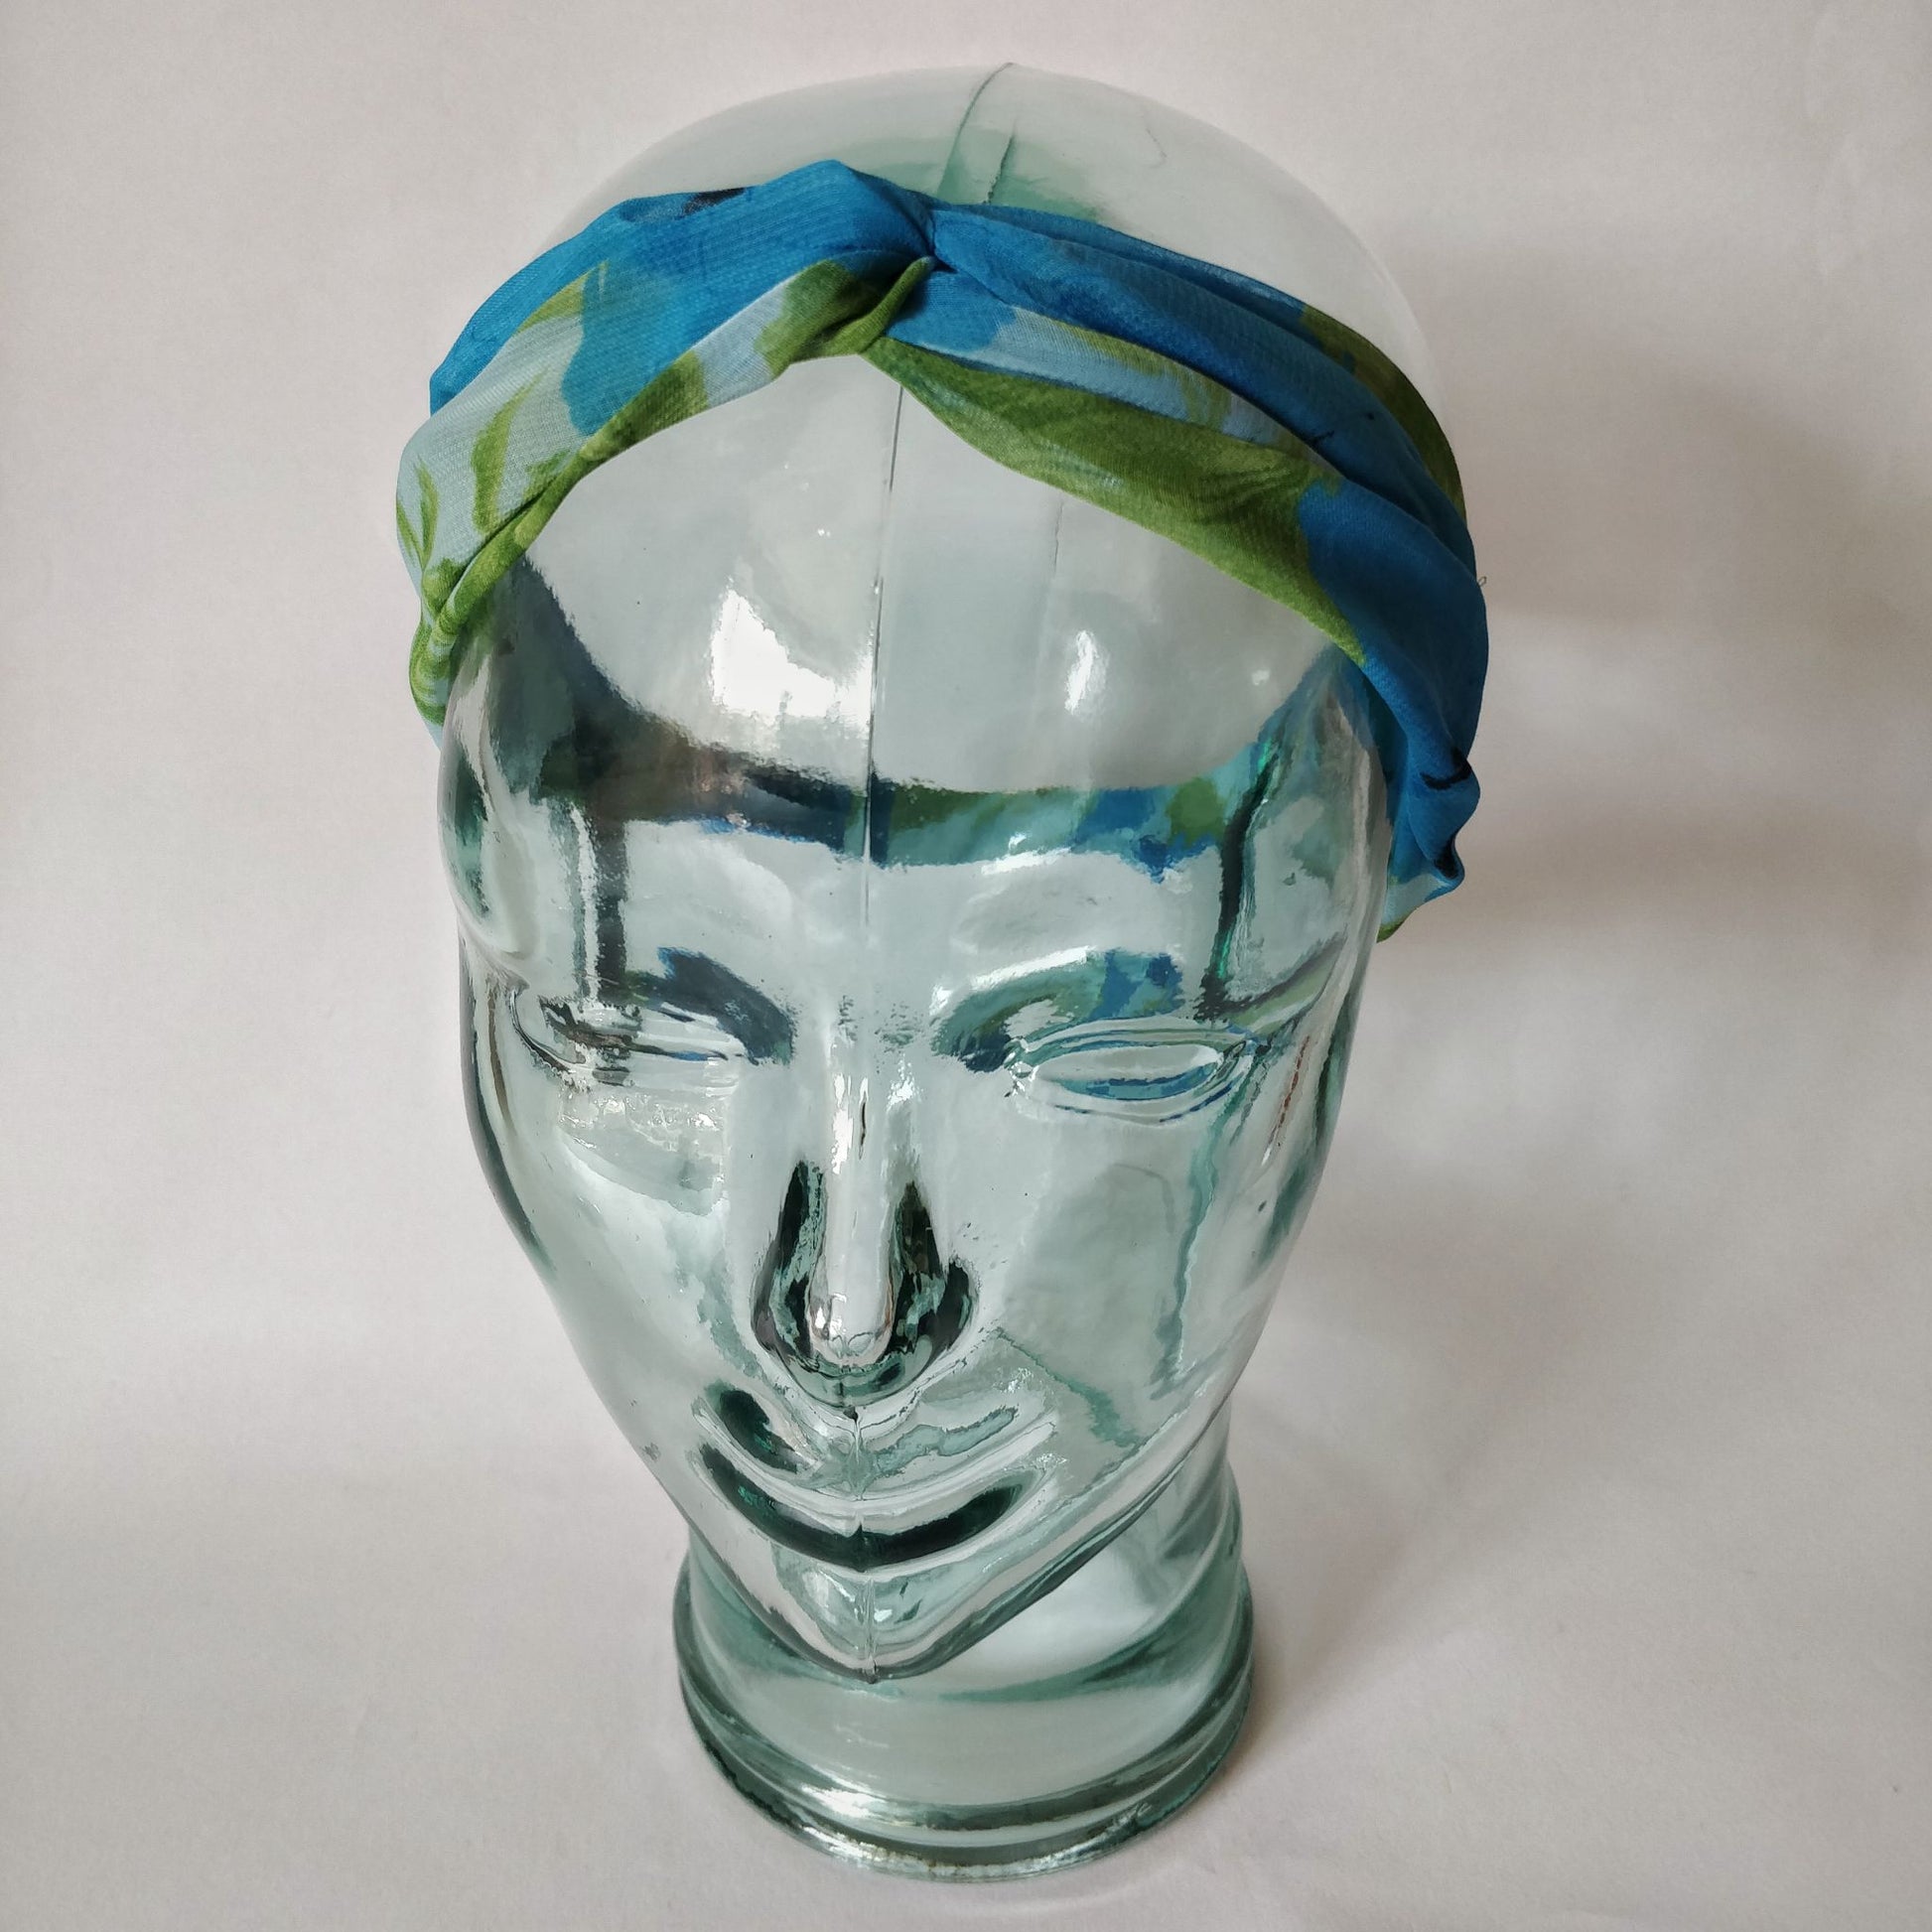 Floral Turban Headband Empowering Women in India - blue floral print